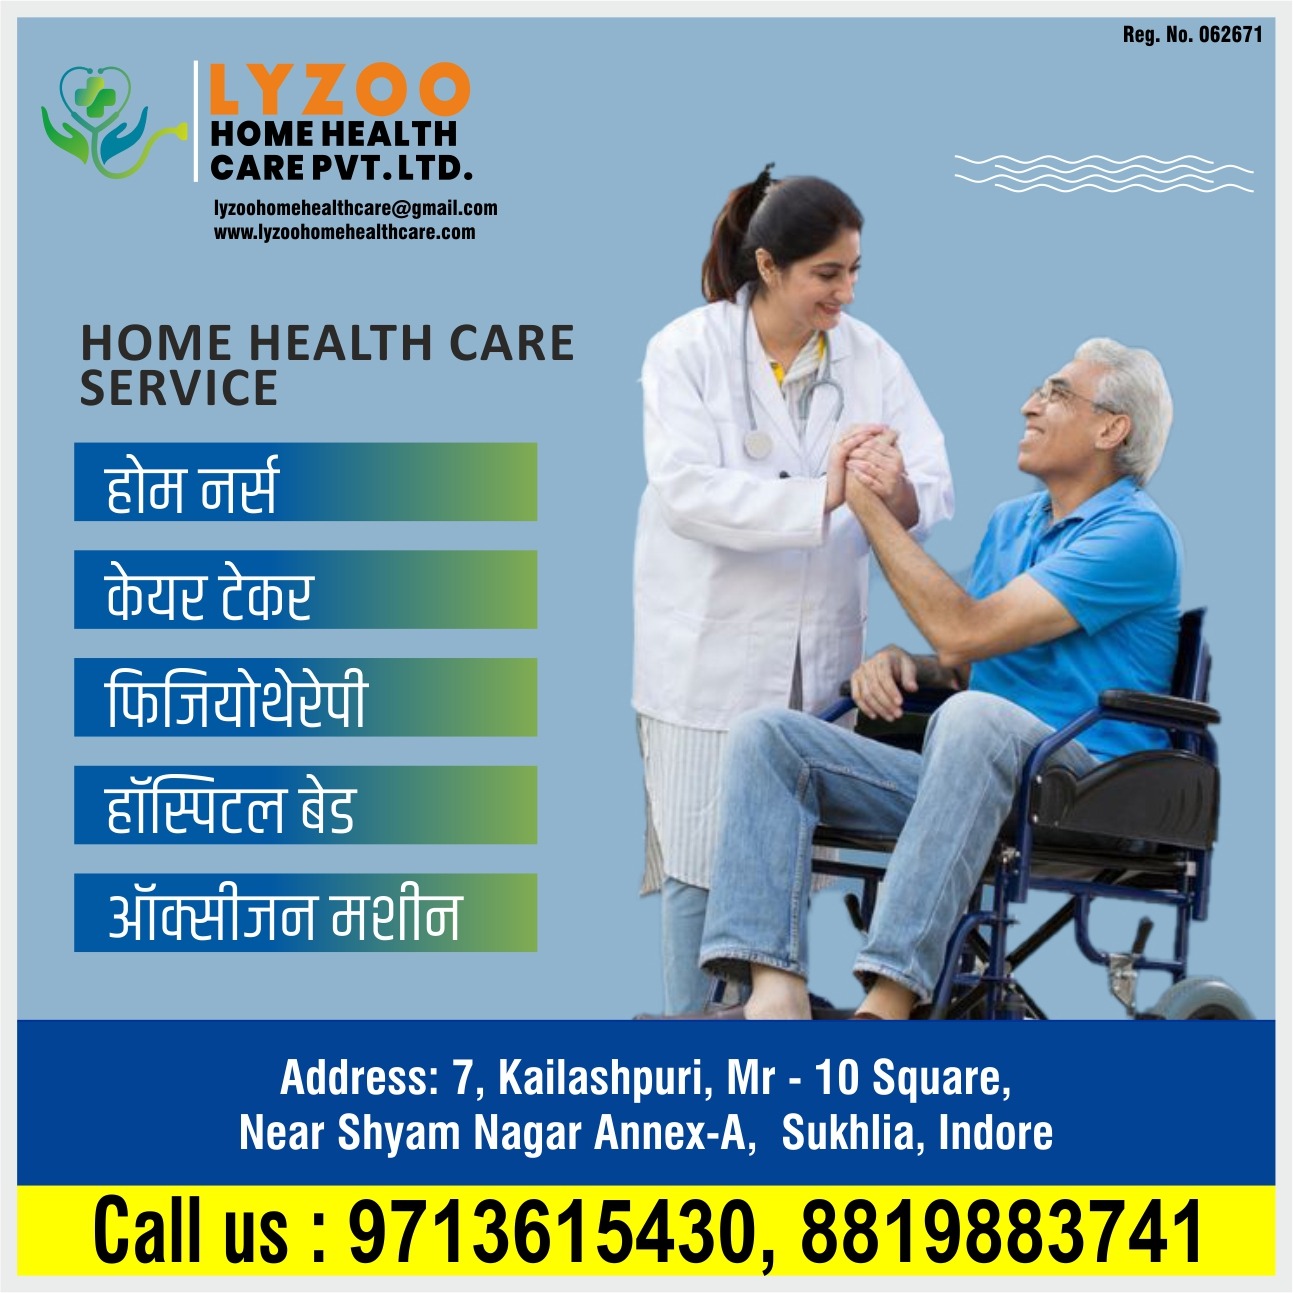 Best Home Healthcare services in Indore